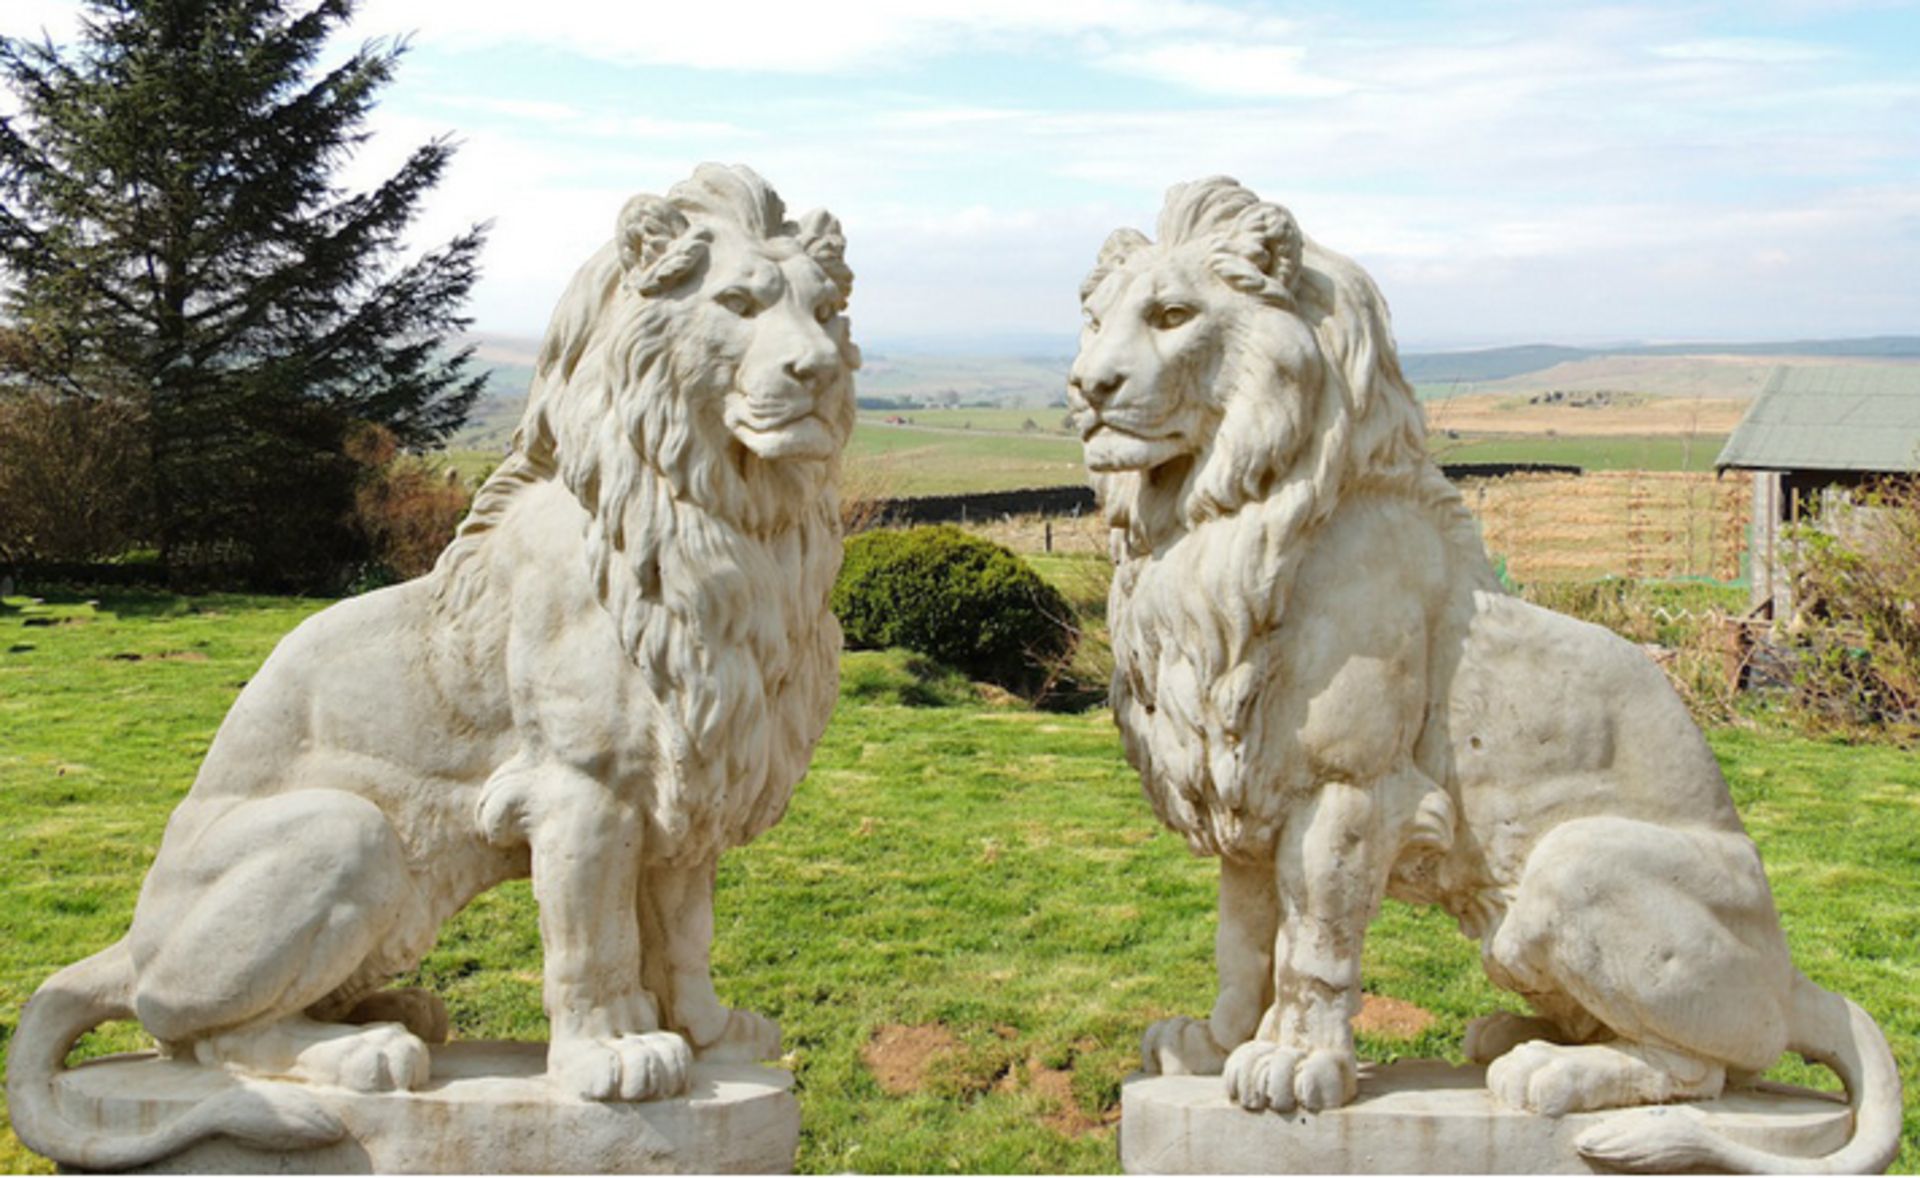 HUGE MAJESTIC LIONS - GATE KEEPERS 4 FT HIGH WEIGH c.1/2 TON EACH!